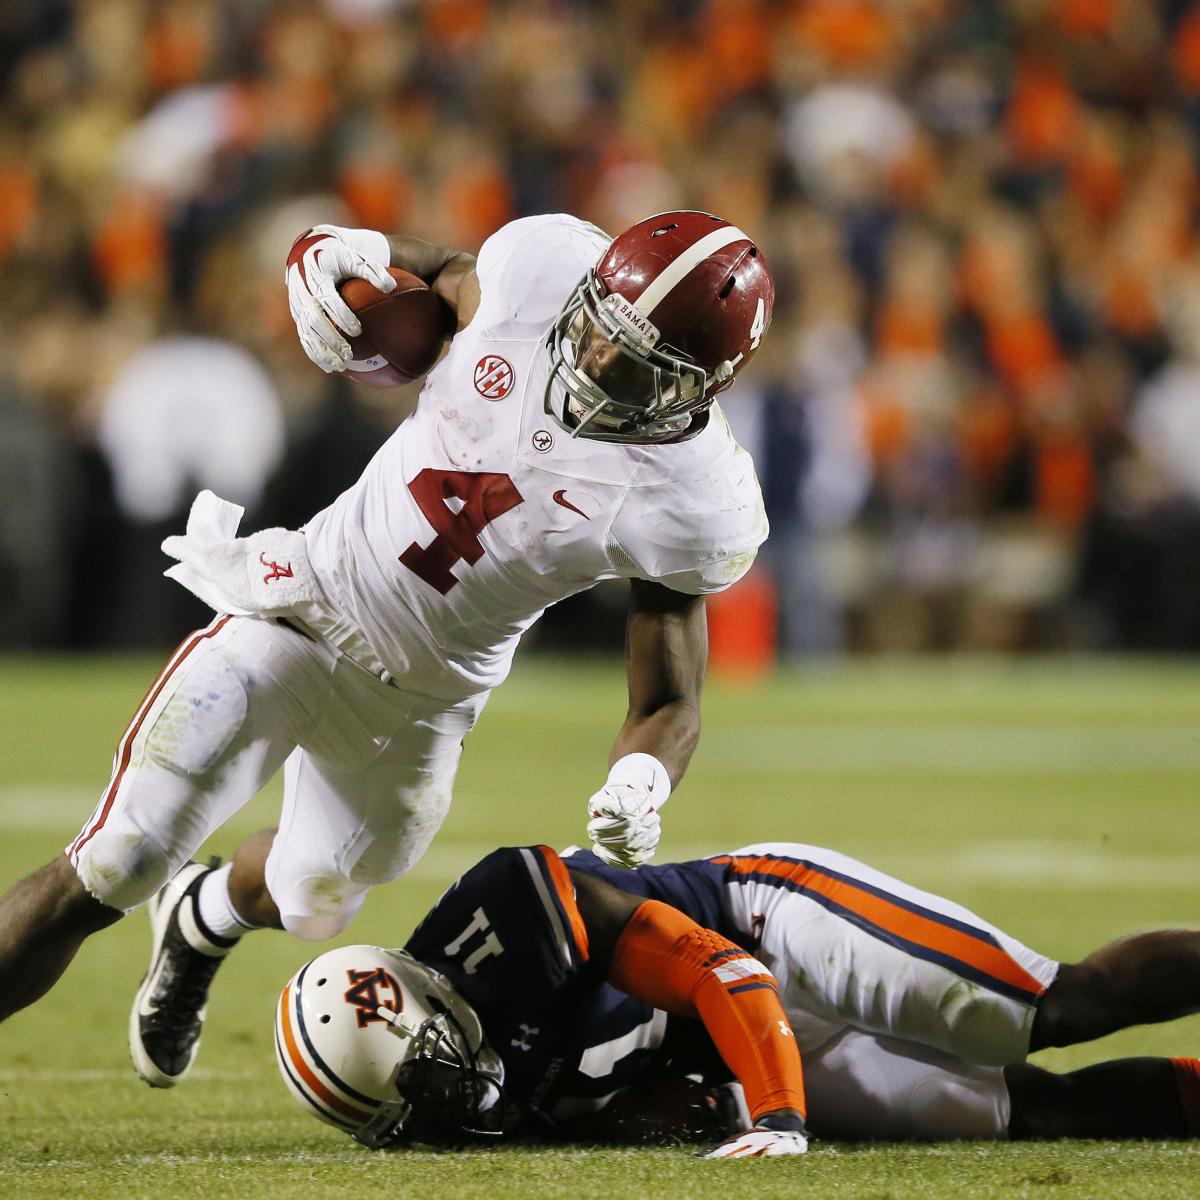 Bcs Bowl Games 2013 14 Matchups And Players Sure To Impress Fans News Scores Highlights 0791